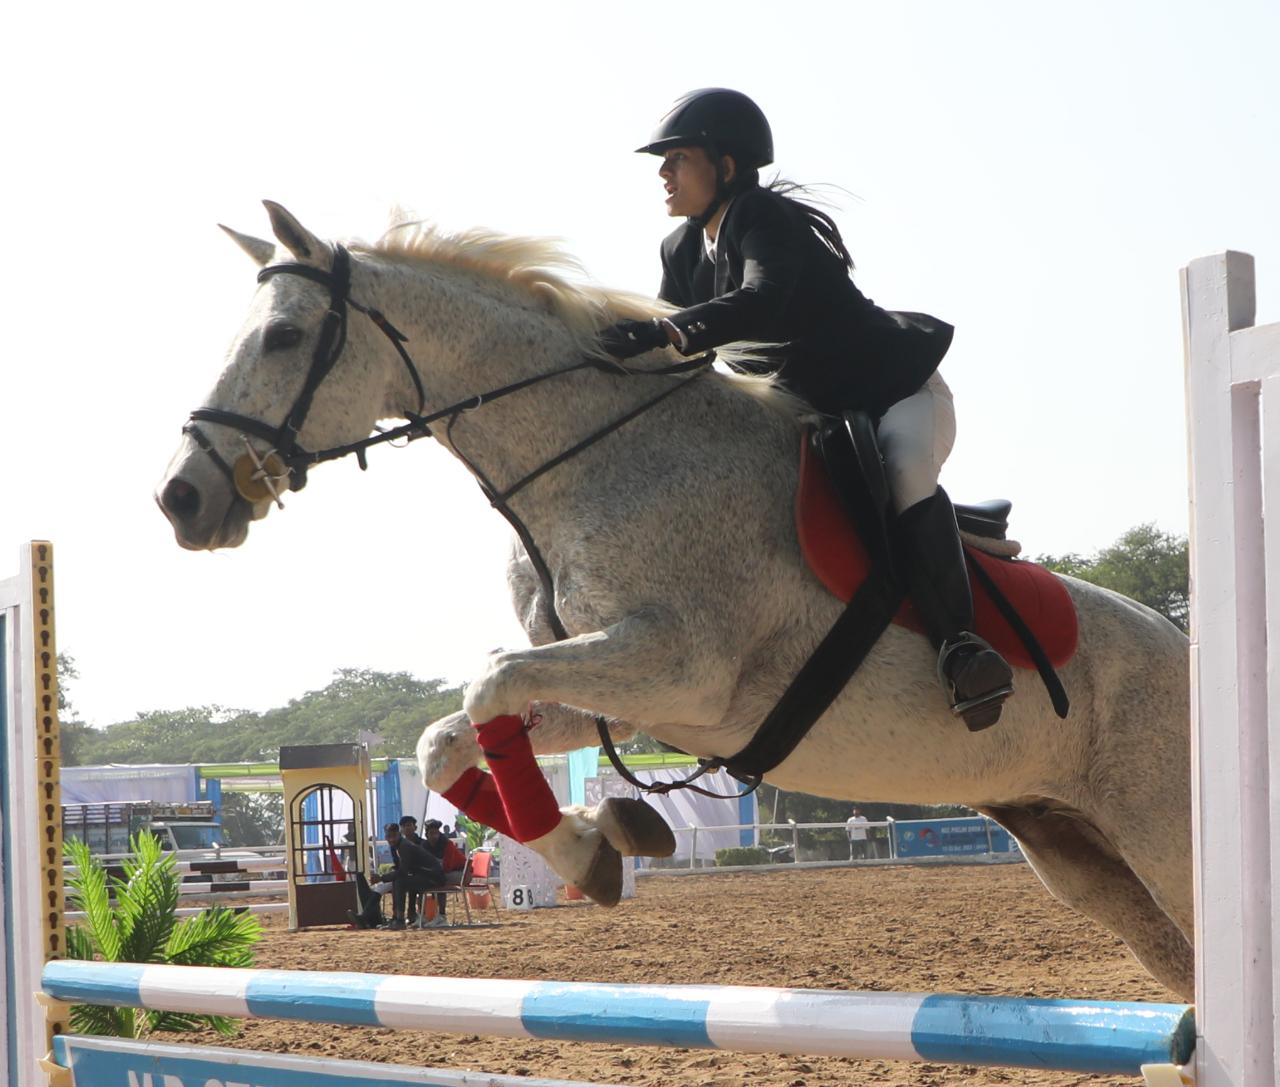 National horse riding competition organized in Bhopal